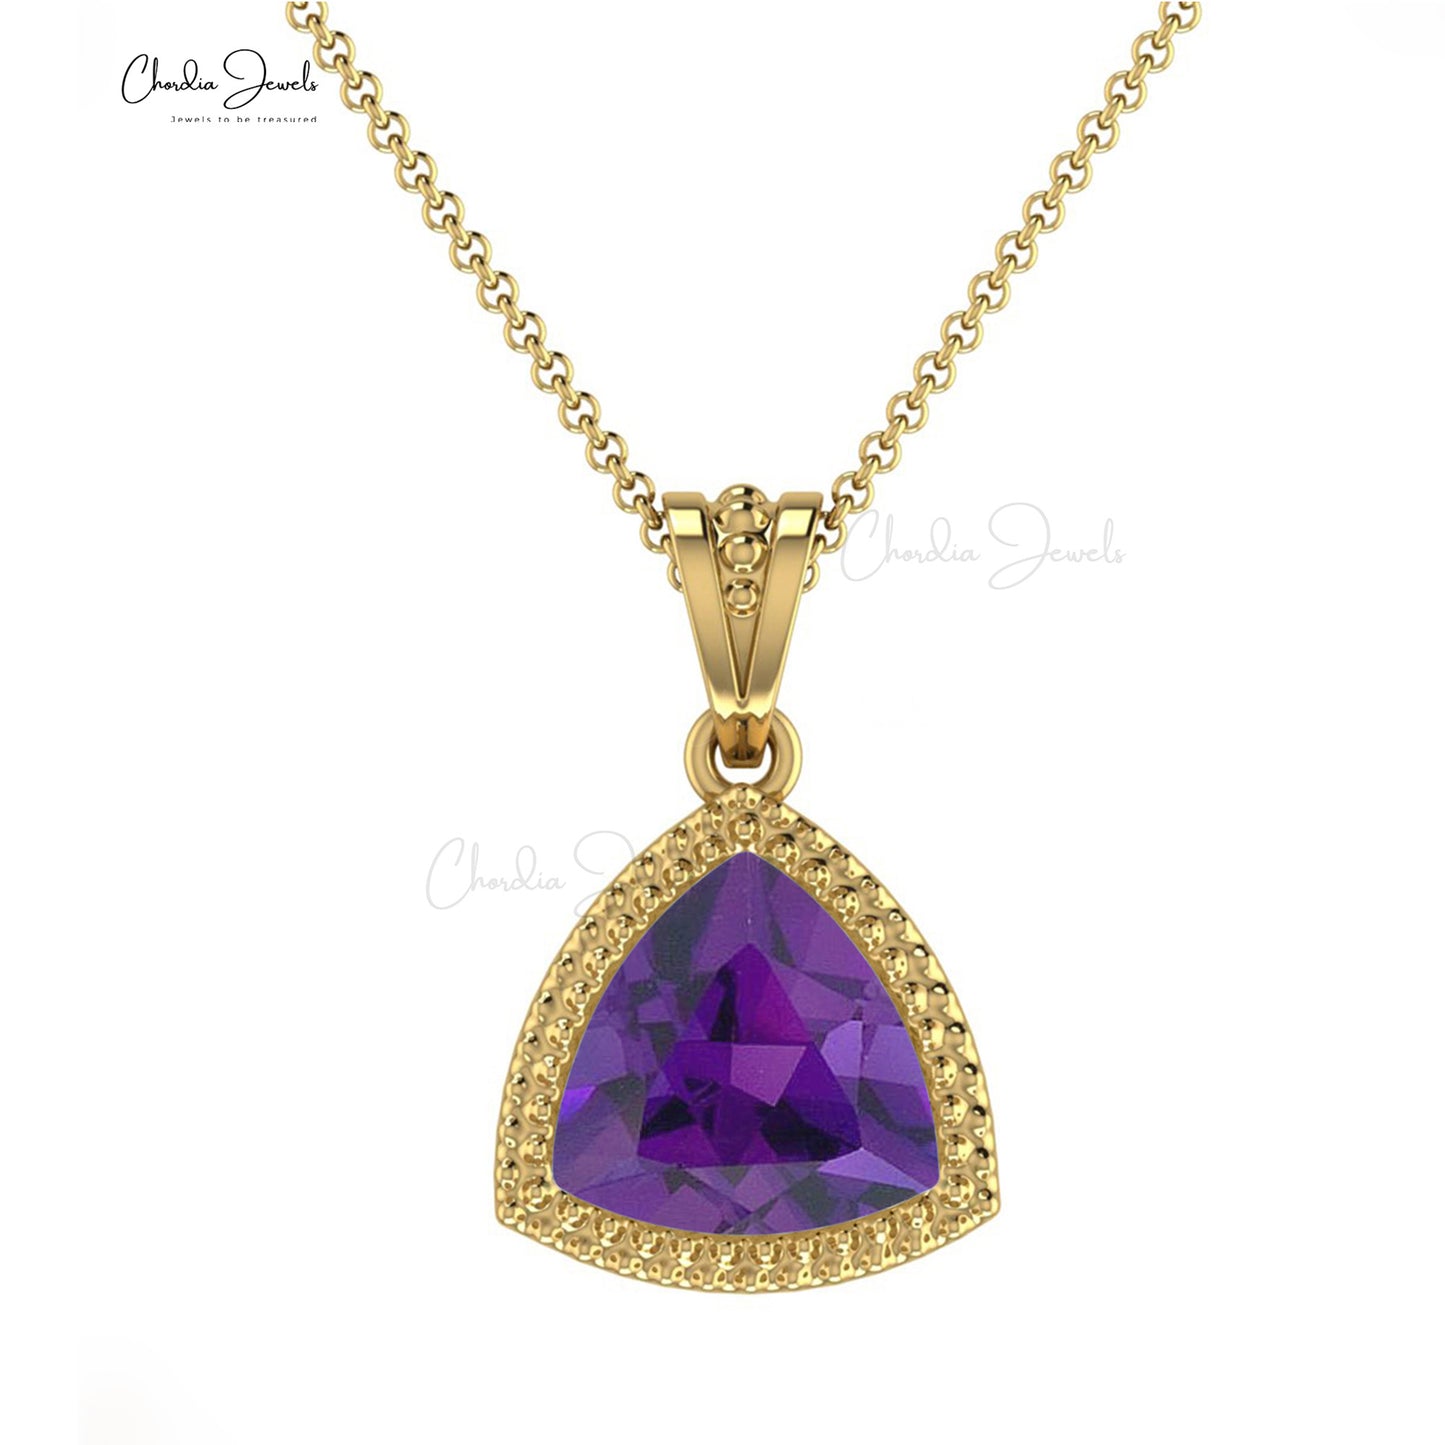 Load image into Gallery viewer, Real 14k Gold February Birthstone Gemstone Pendant 6mm Trillion Cut 0.68 Ct Natural Purple Amethyst Pendant Necklace Anniversary Gift For Wife
